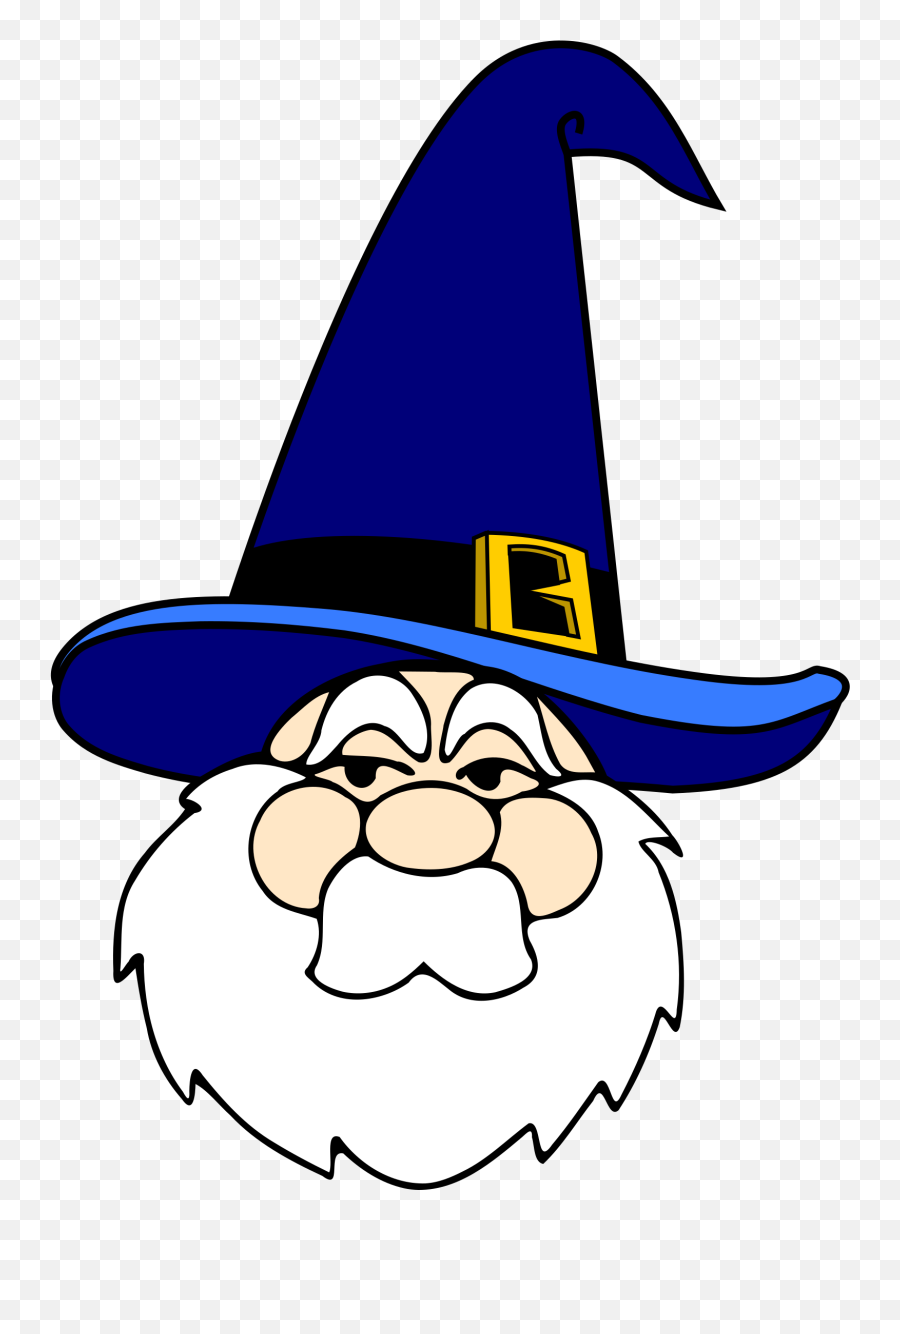 Free Clip Art Wizard In Blue Hat By Papapishu - Wizard With Blue Hat Emoji,Witch Hat Clipart